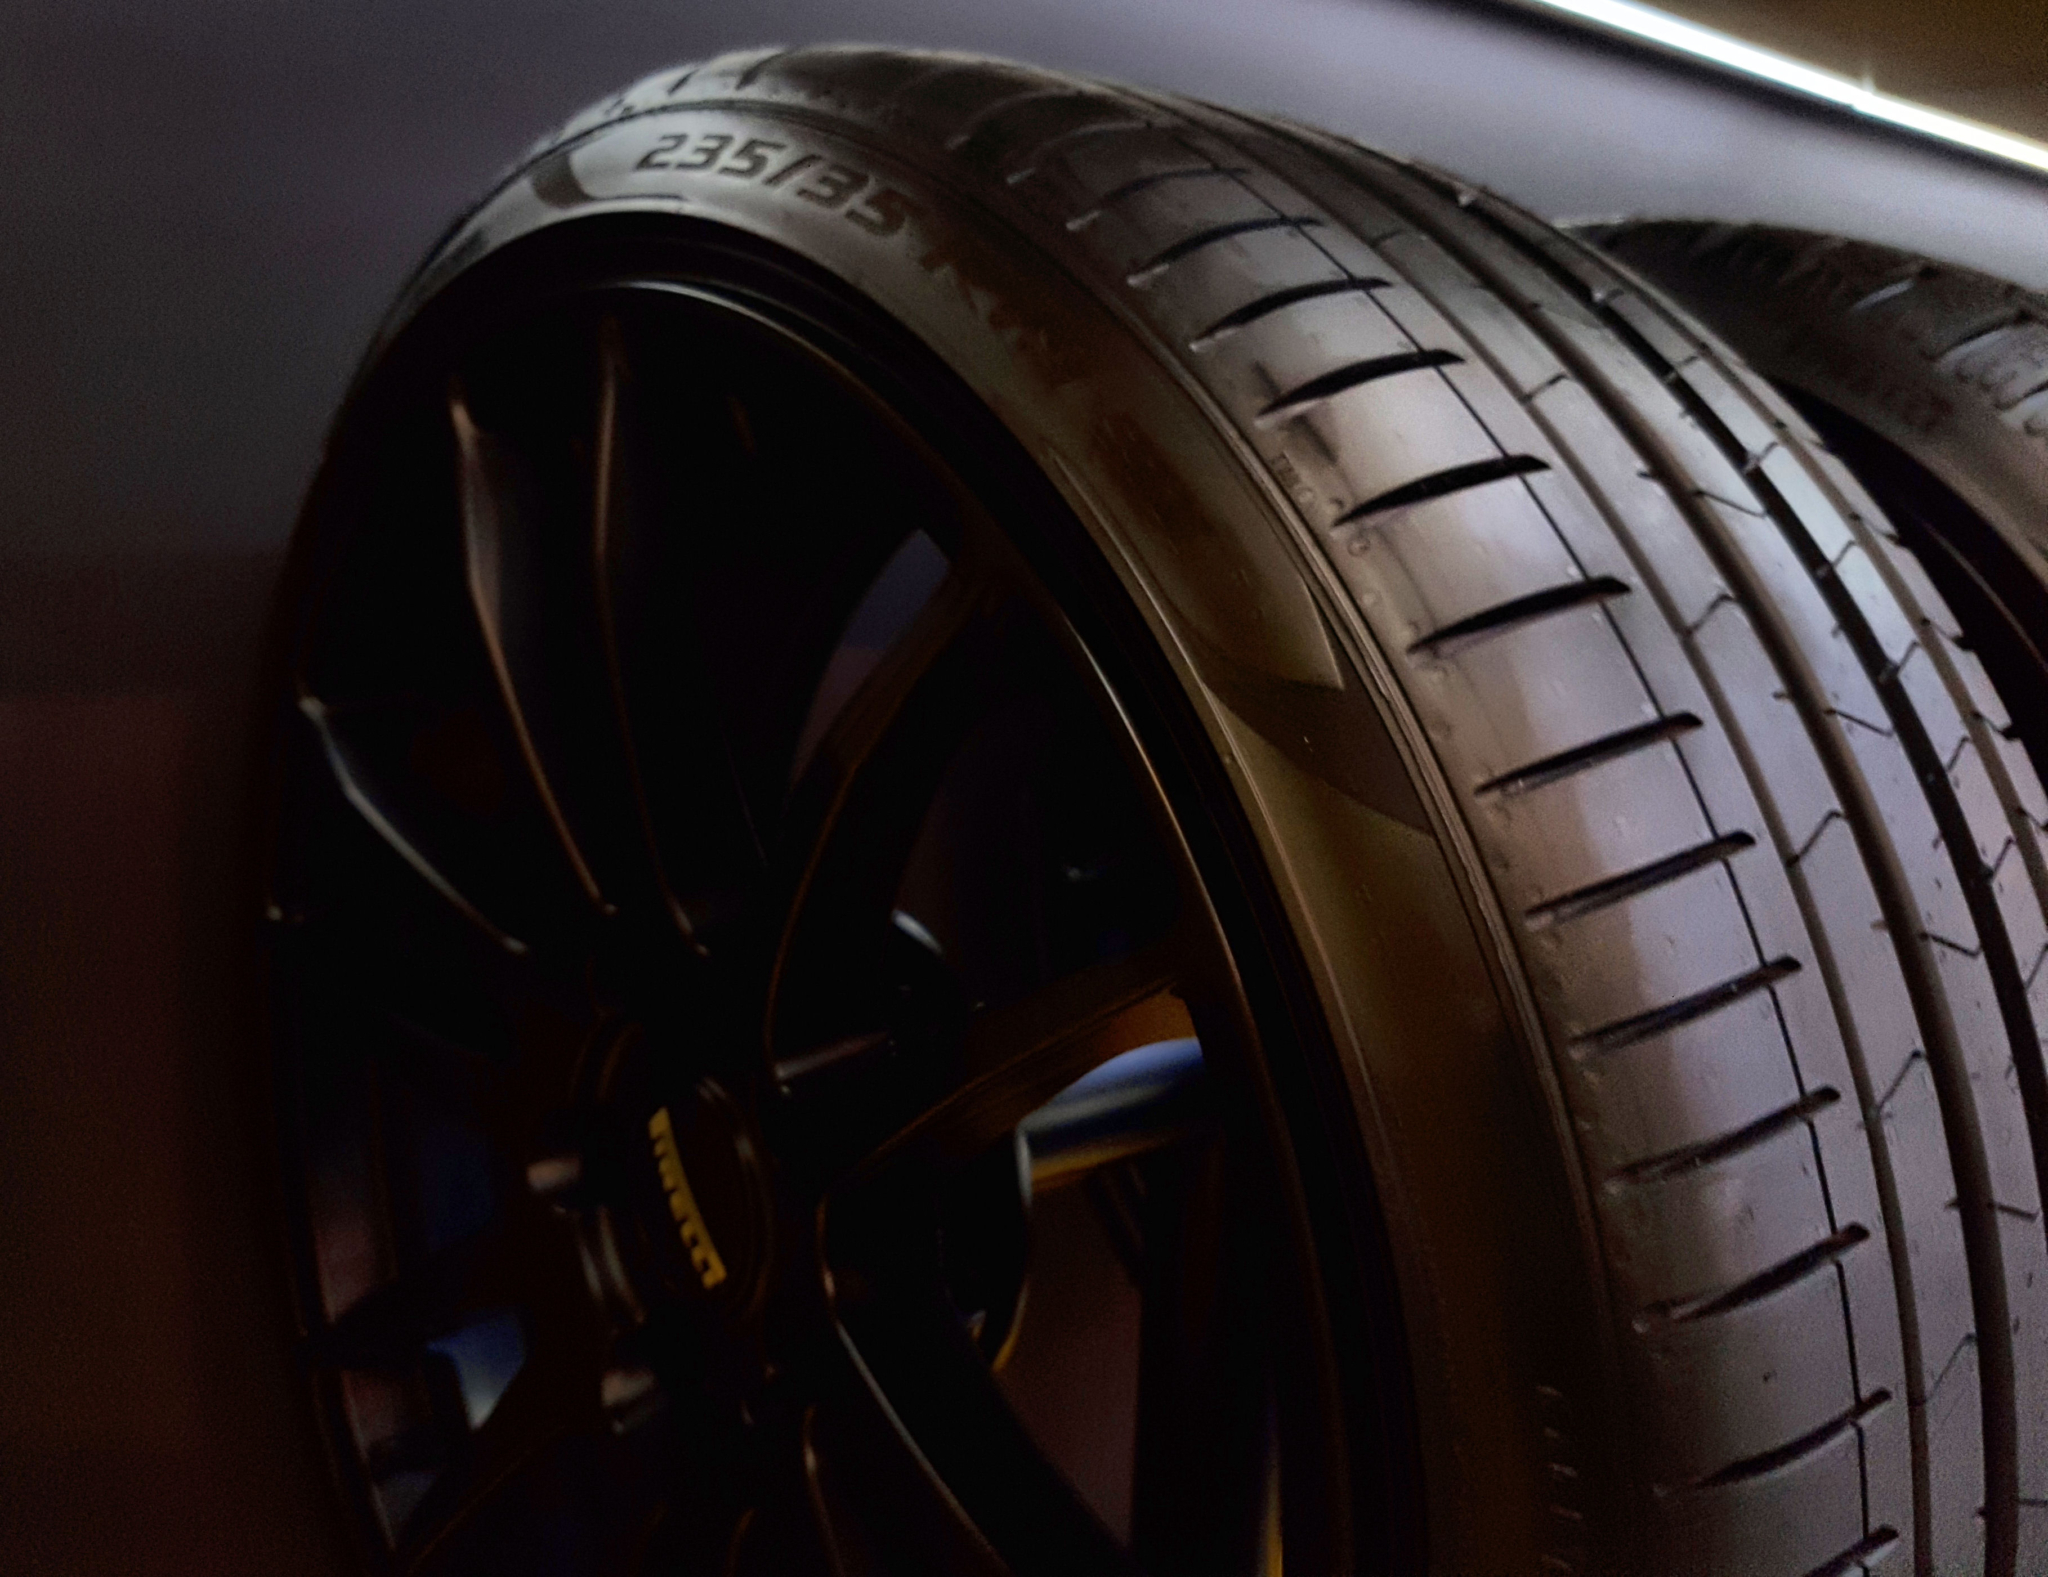 Higher rim size car tyre sales rising in UK’s stratified recovery – GfK